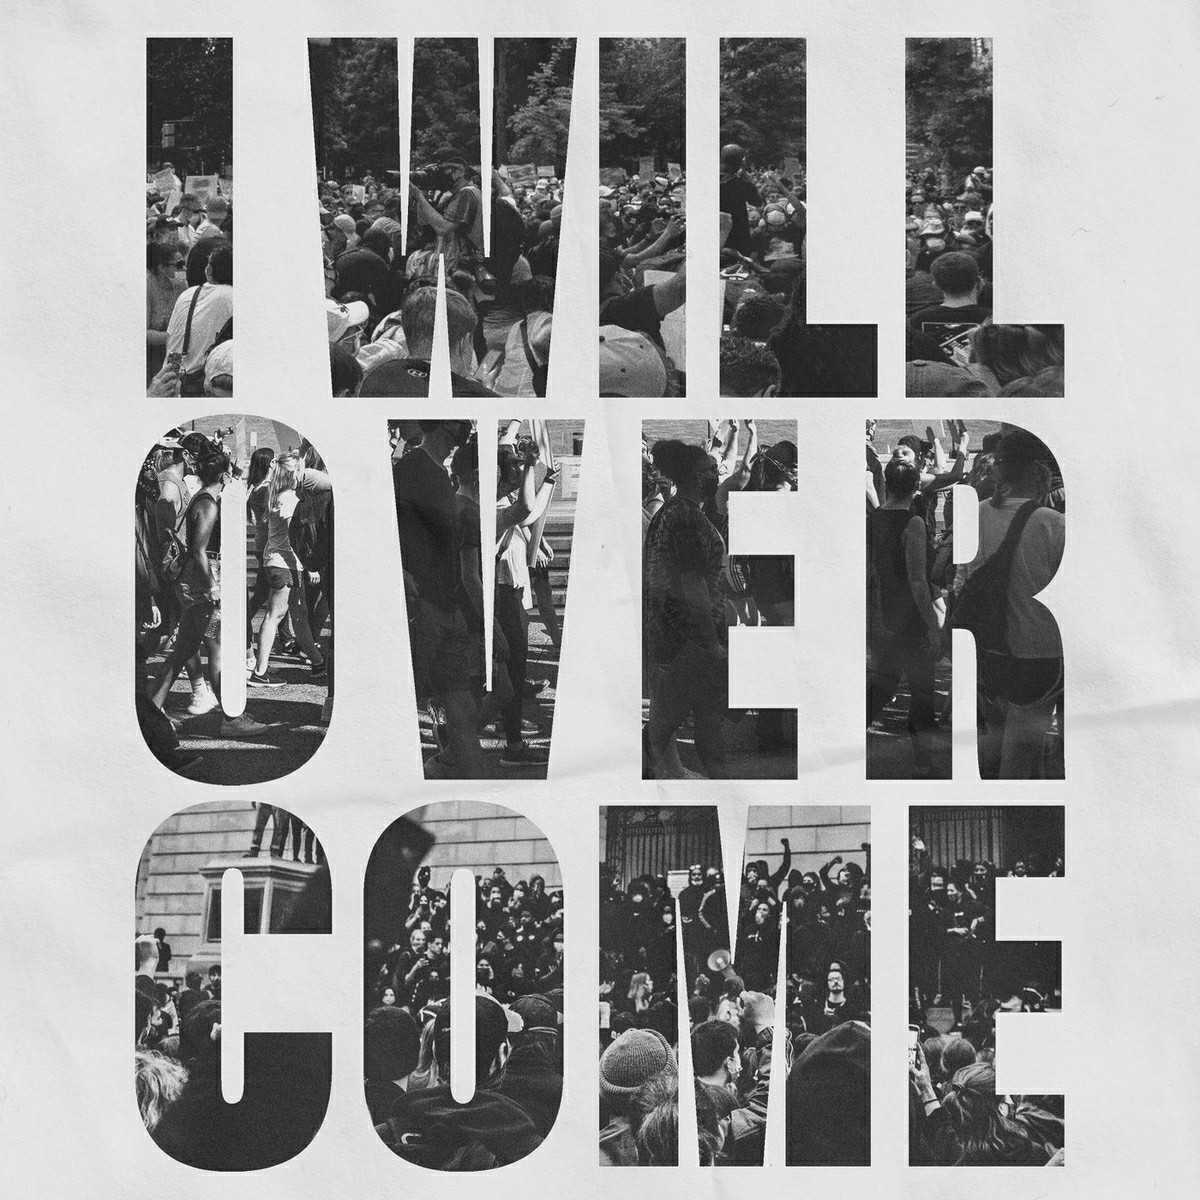 Welshly Arms - I Will Overcome